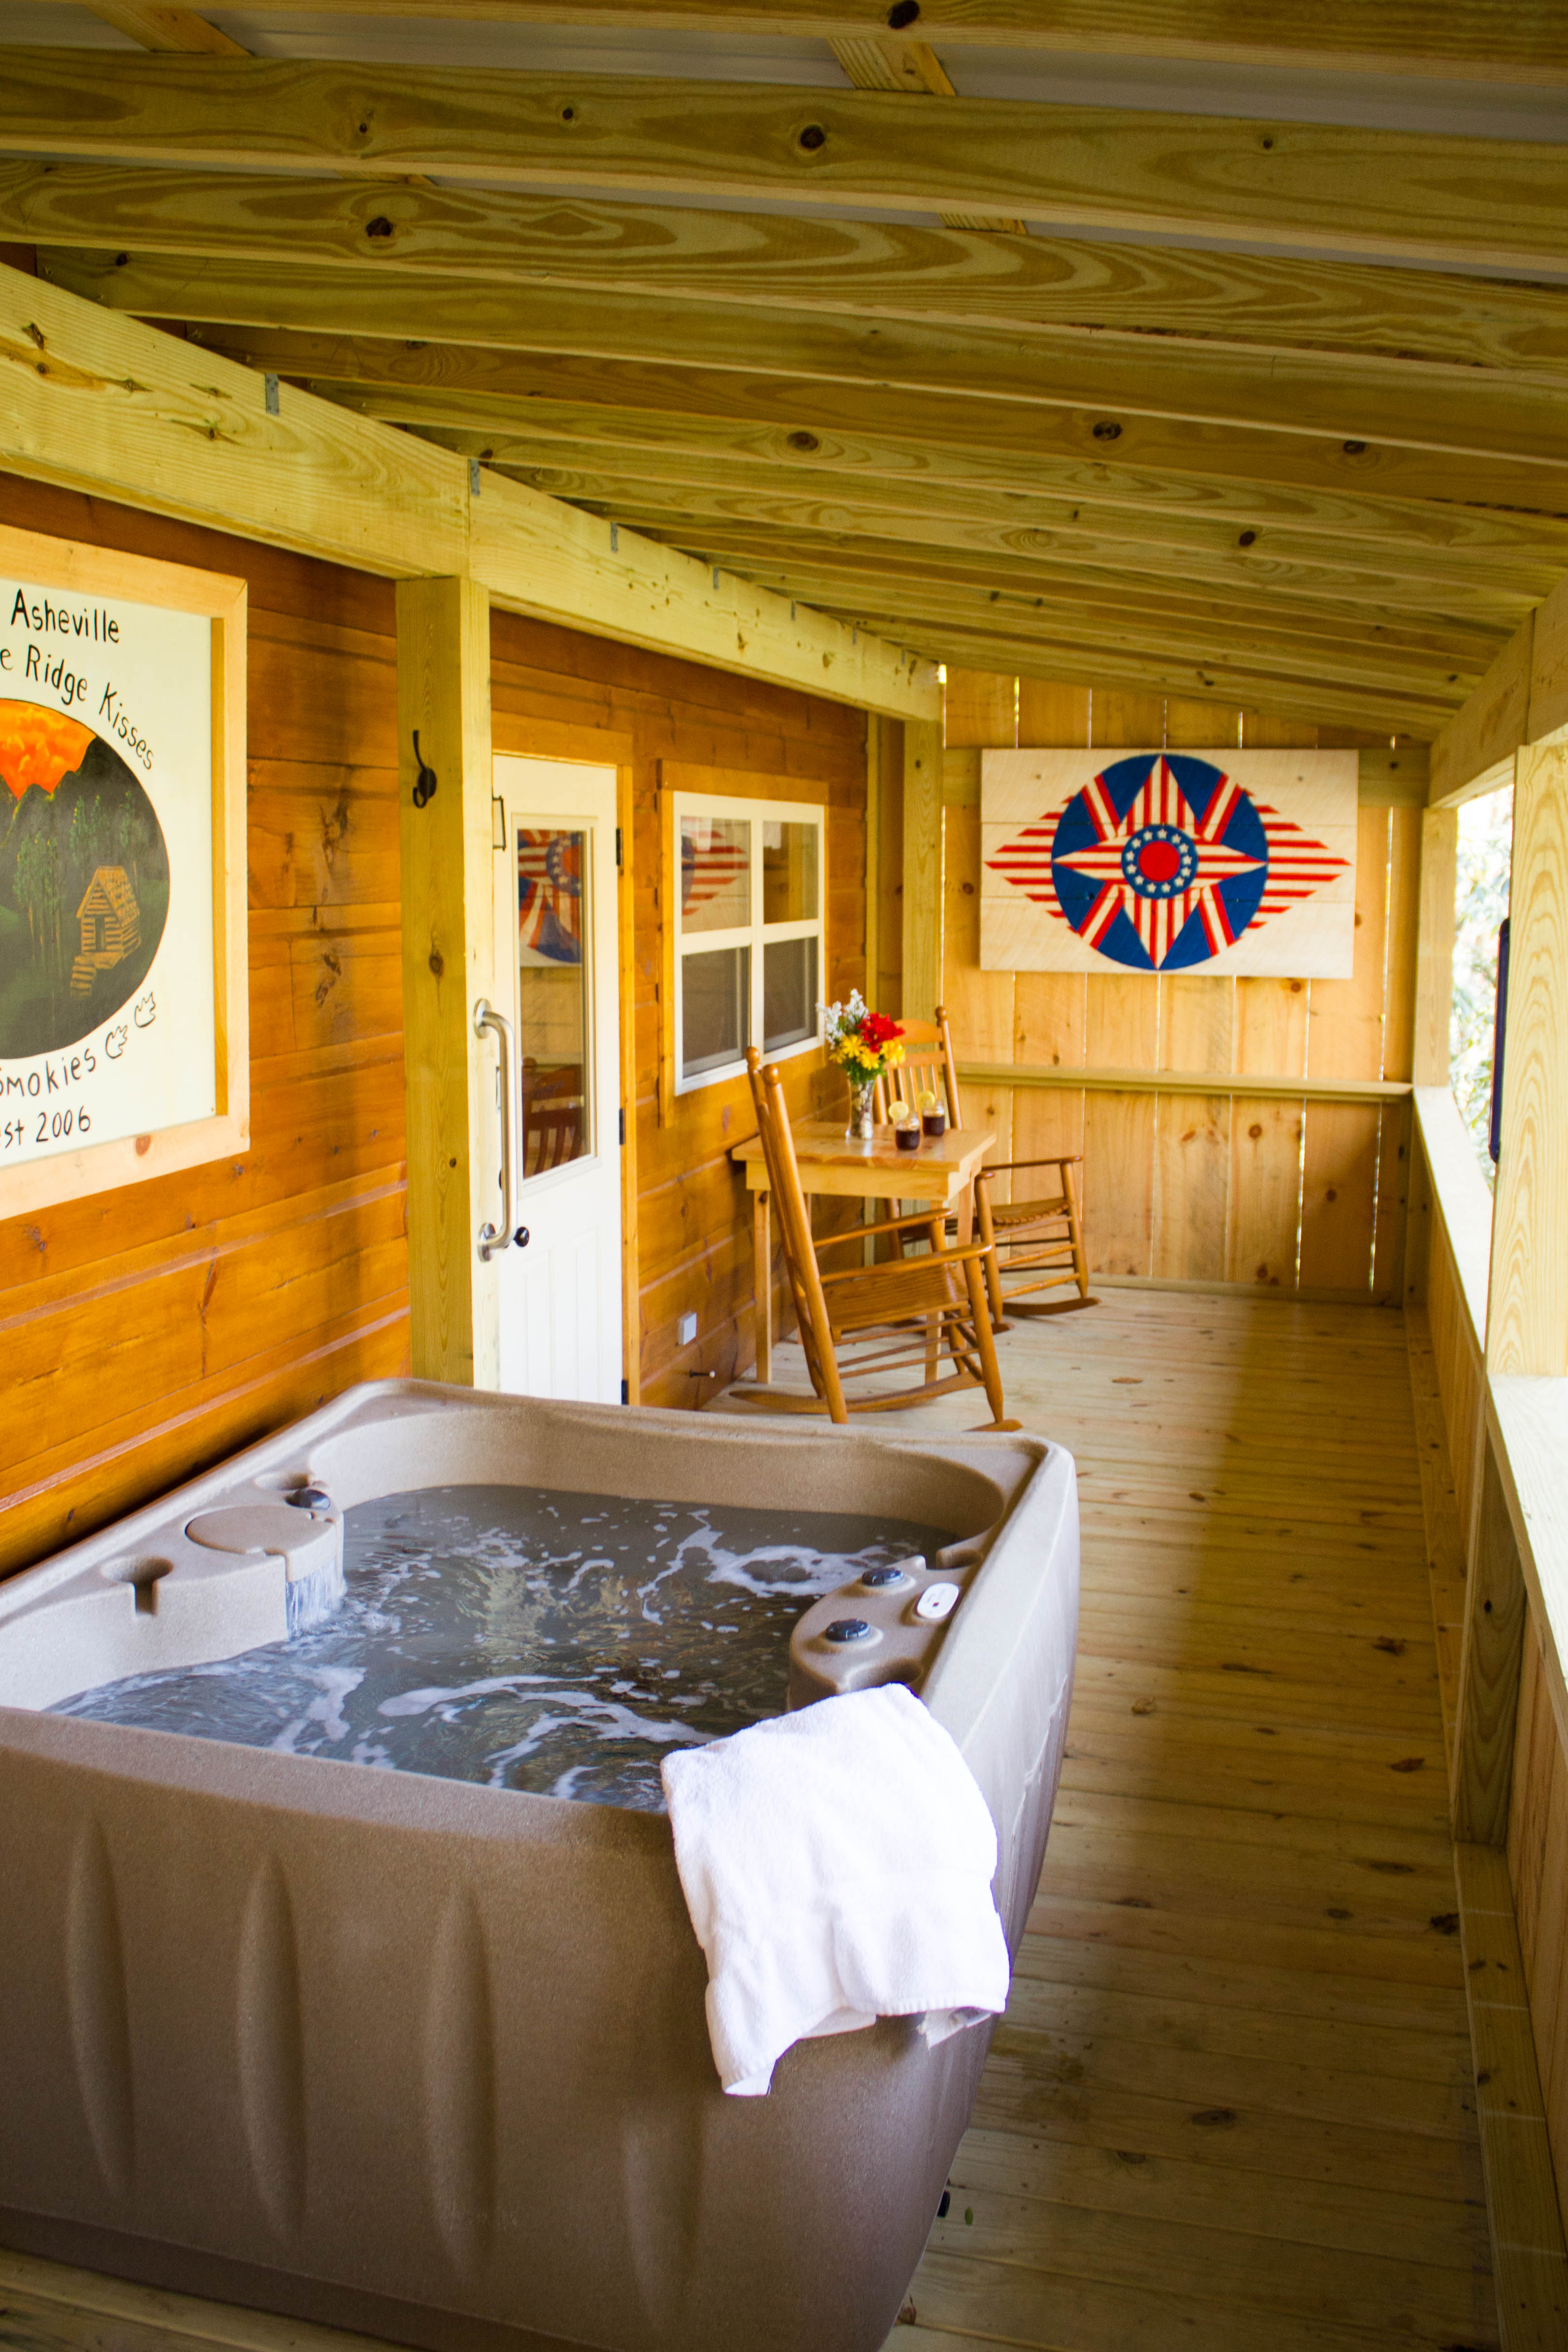 Ewell Operate Woods Cabins of Asheville – Romantic Cabins with Hot Tubs & Fireplaces